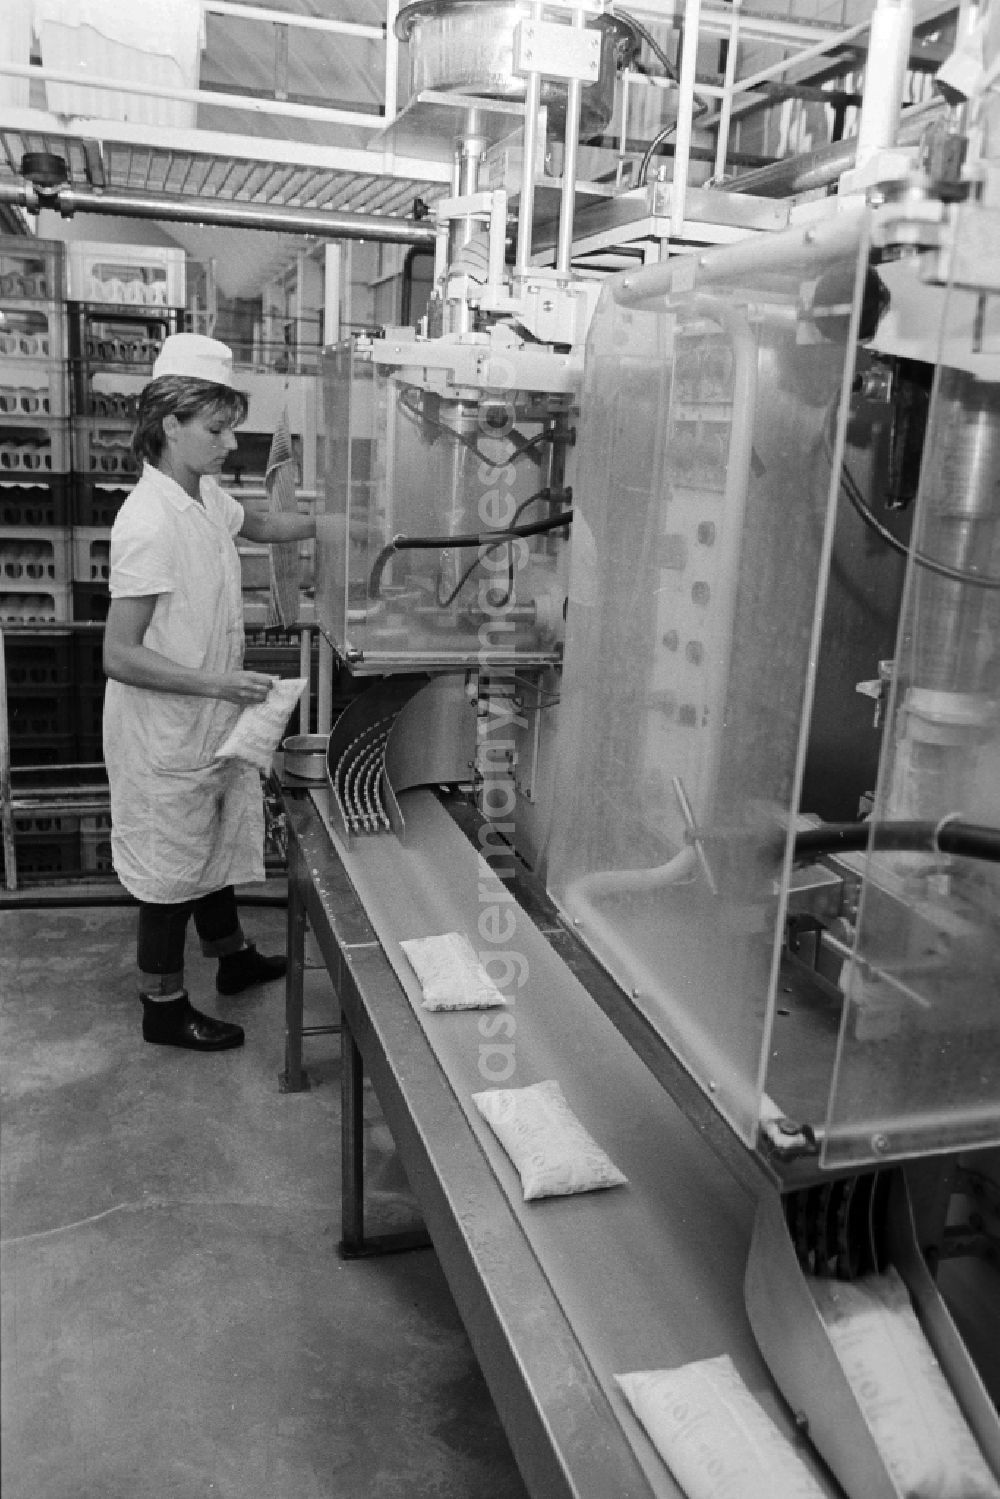 GDR photo archive: Berlin - An employee of the fresh milk bags in the milk court VEB Berlin in Pankow Heiner's village in Berlin, the former capital of the GDR, German democratic republic